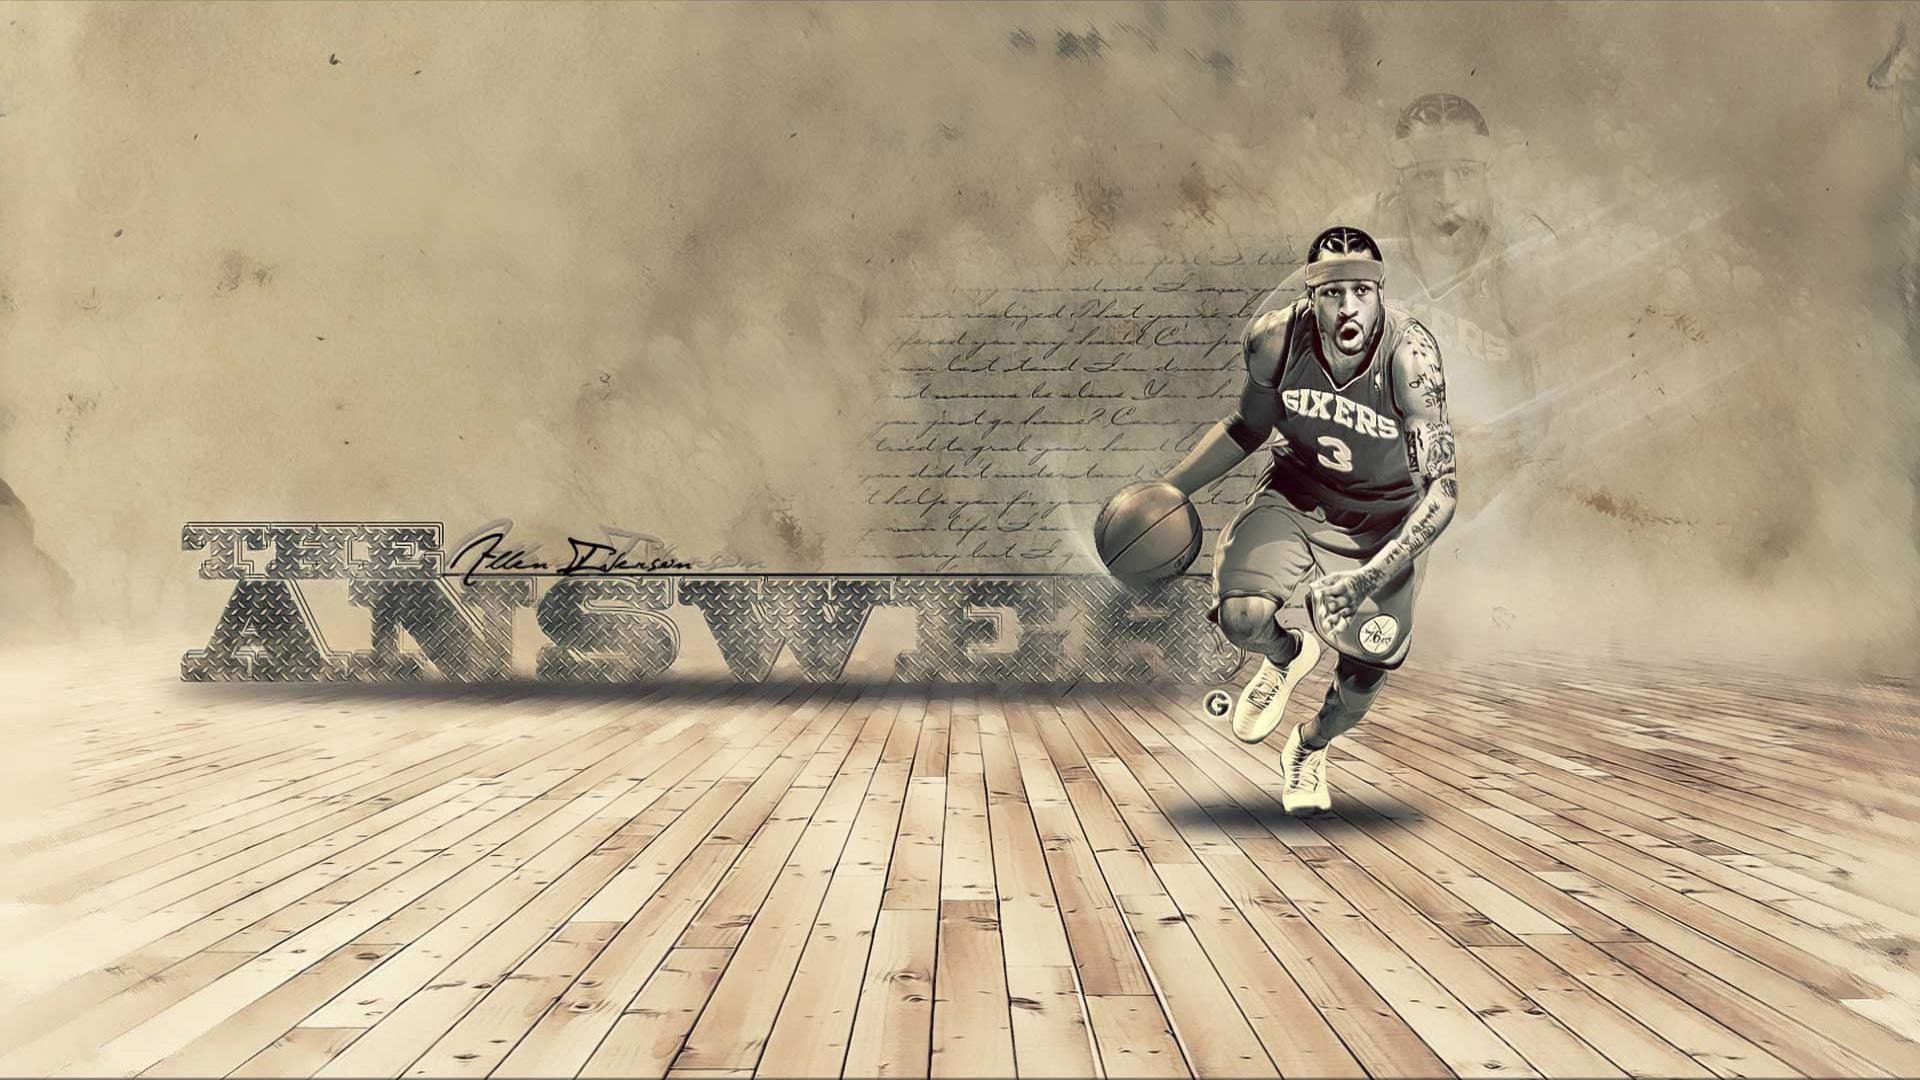 Download 1080p Allen Iverson PC background ID:53354 for free